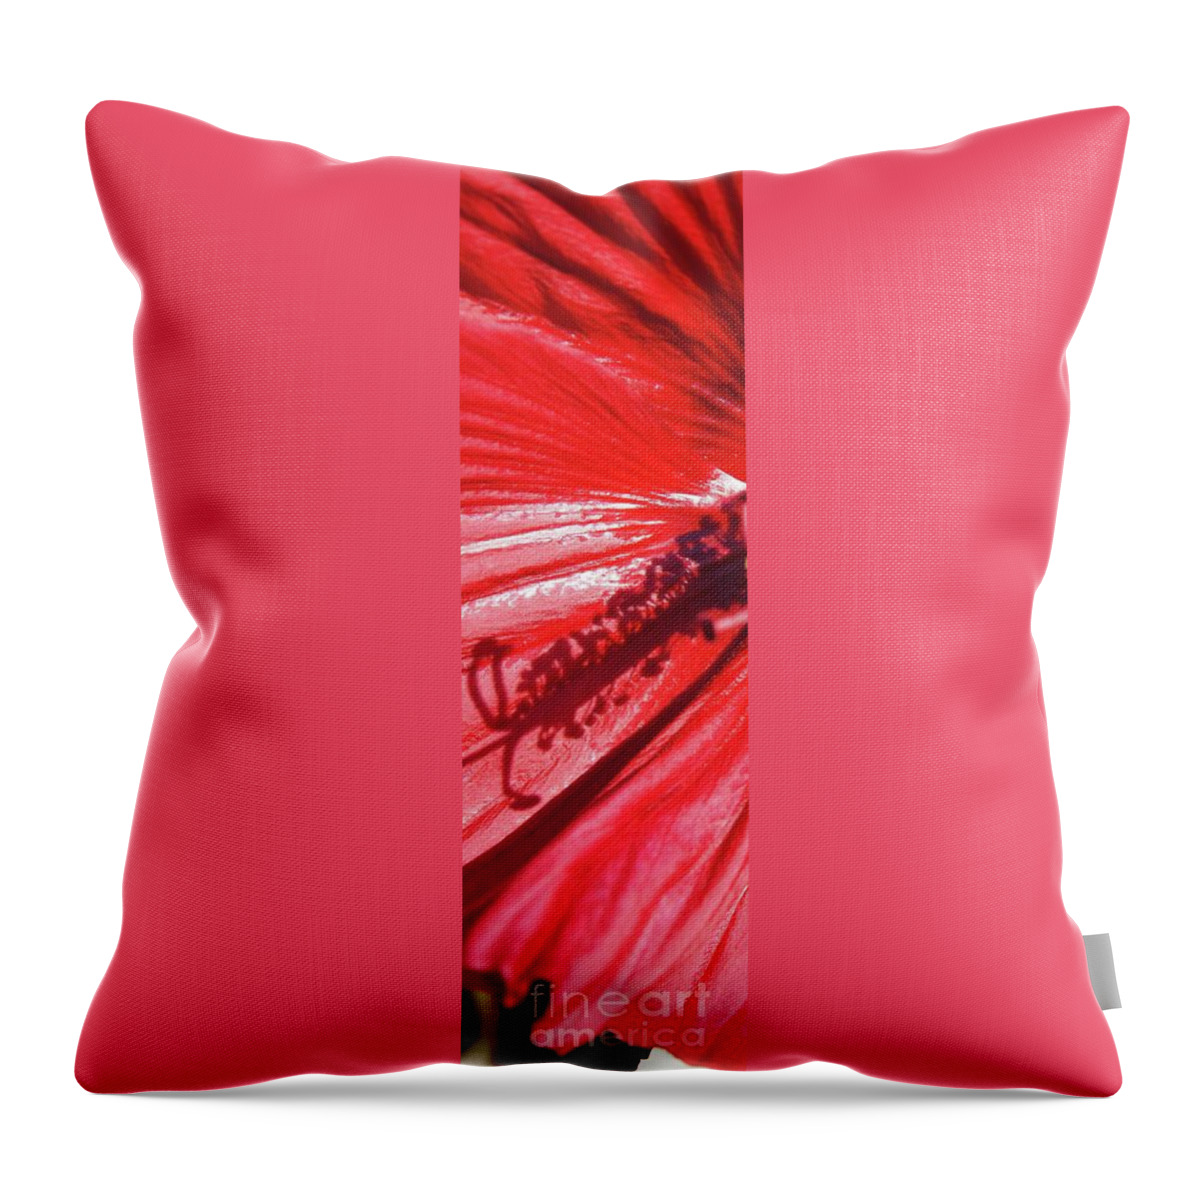 Hibiscus Throw Pillow featuring the photograph Pistil Shadow by Megan Cohen